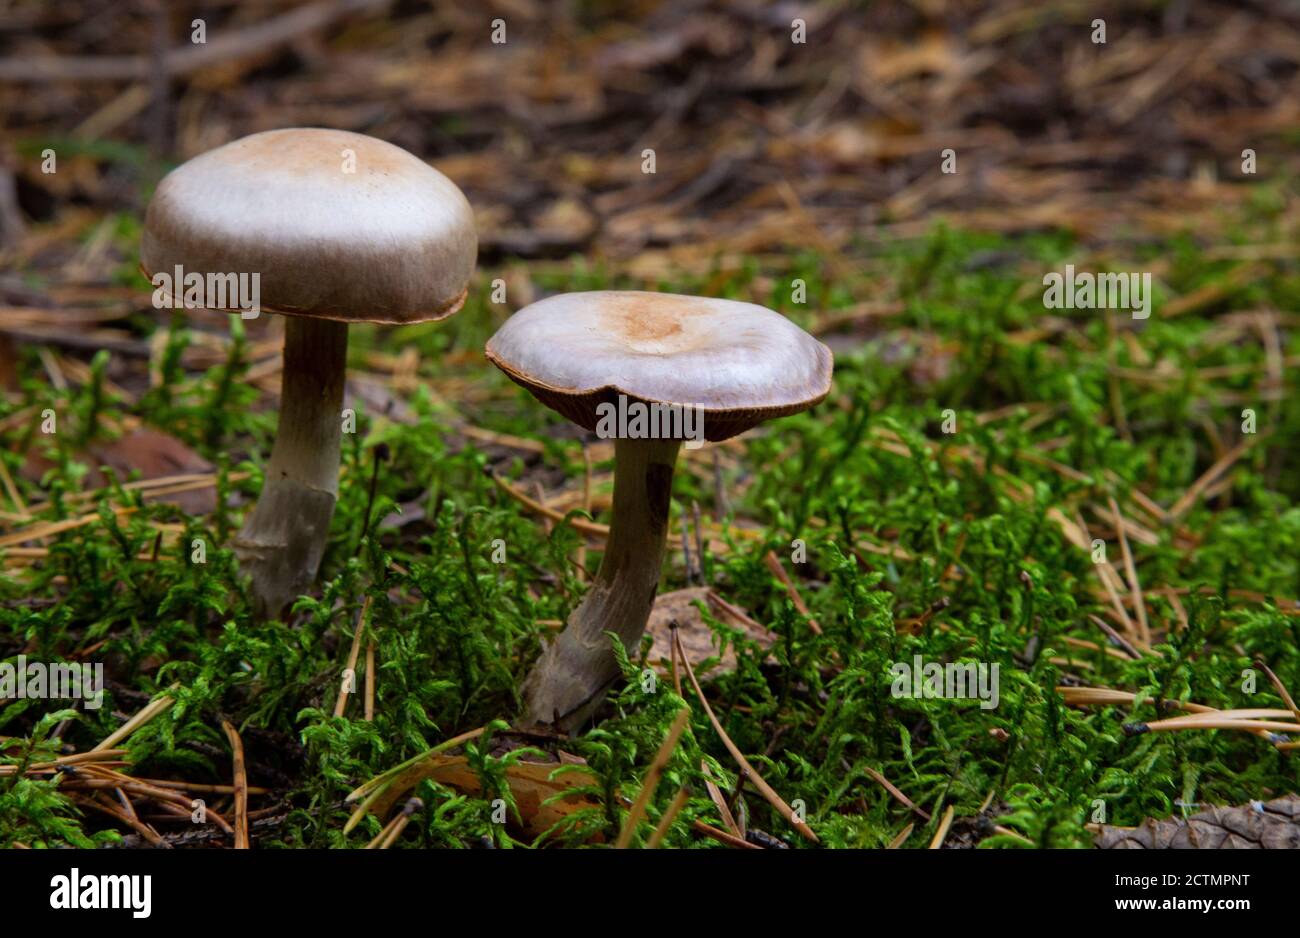 Toadstool, close up of a poisonous mushroom in the forest on green moss ground Stock Photo